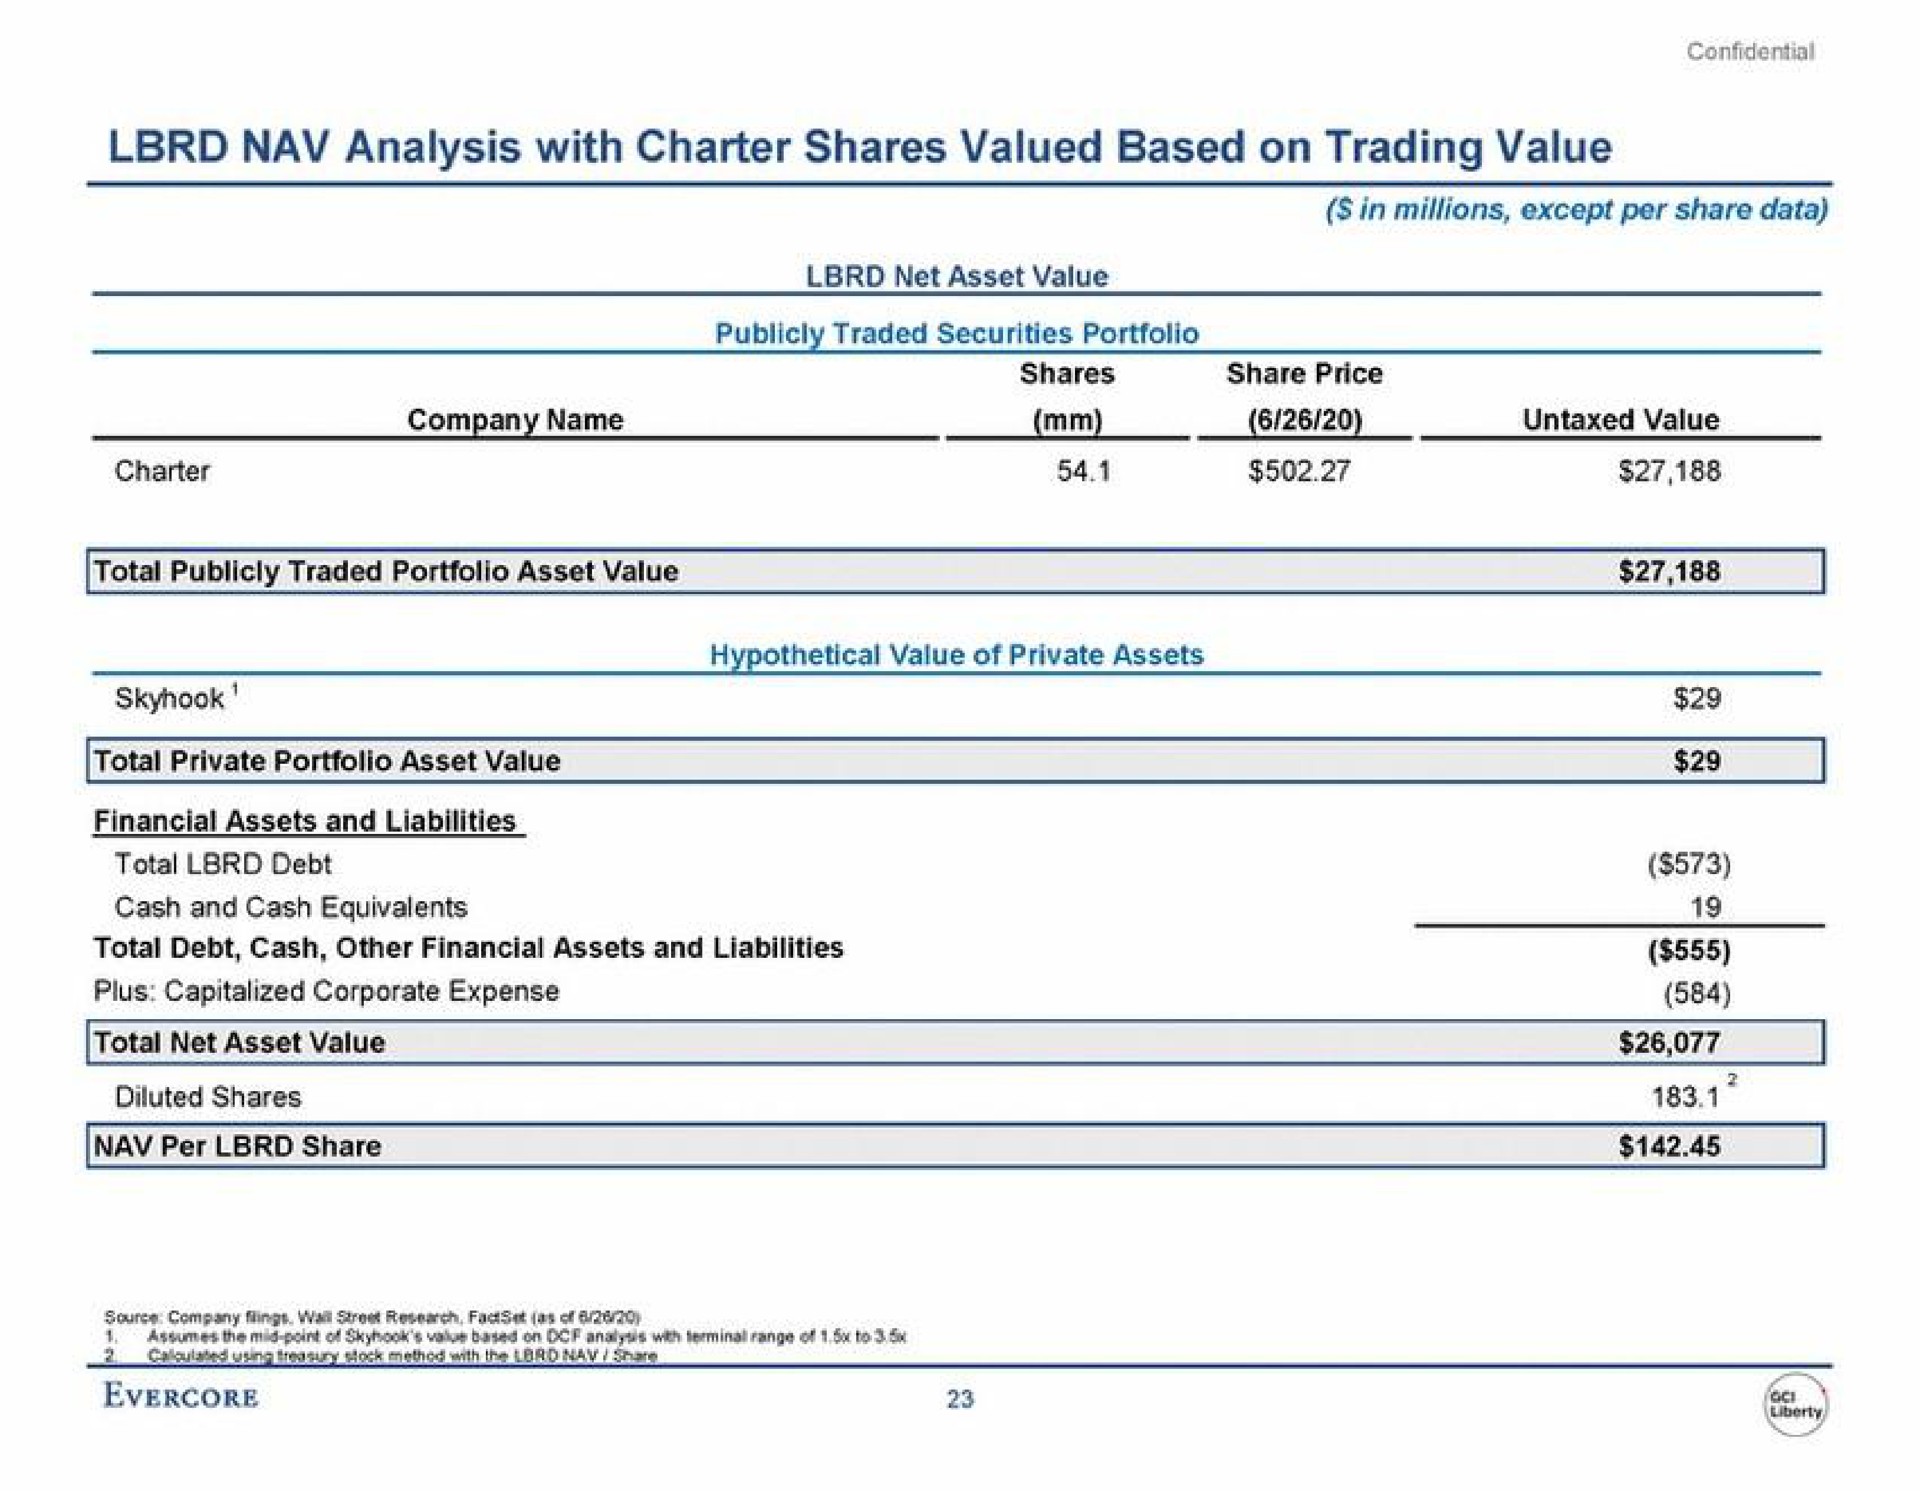 analysis with charter shares valued based on trading value | Evercore